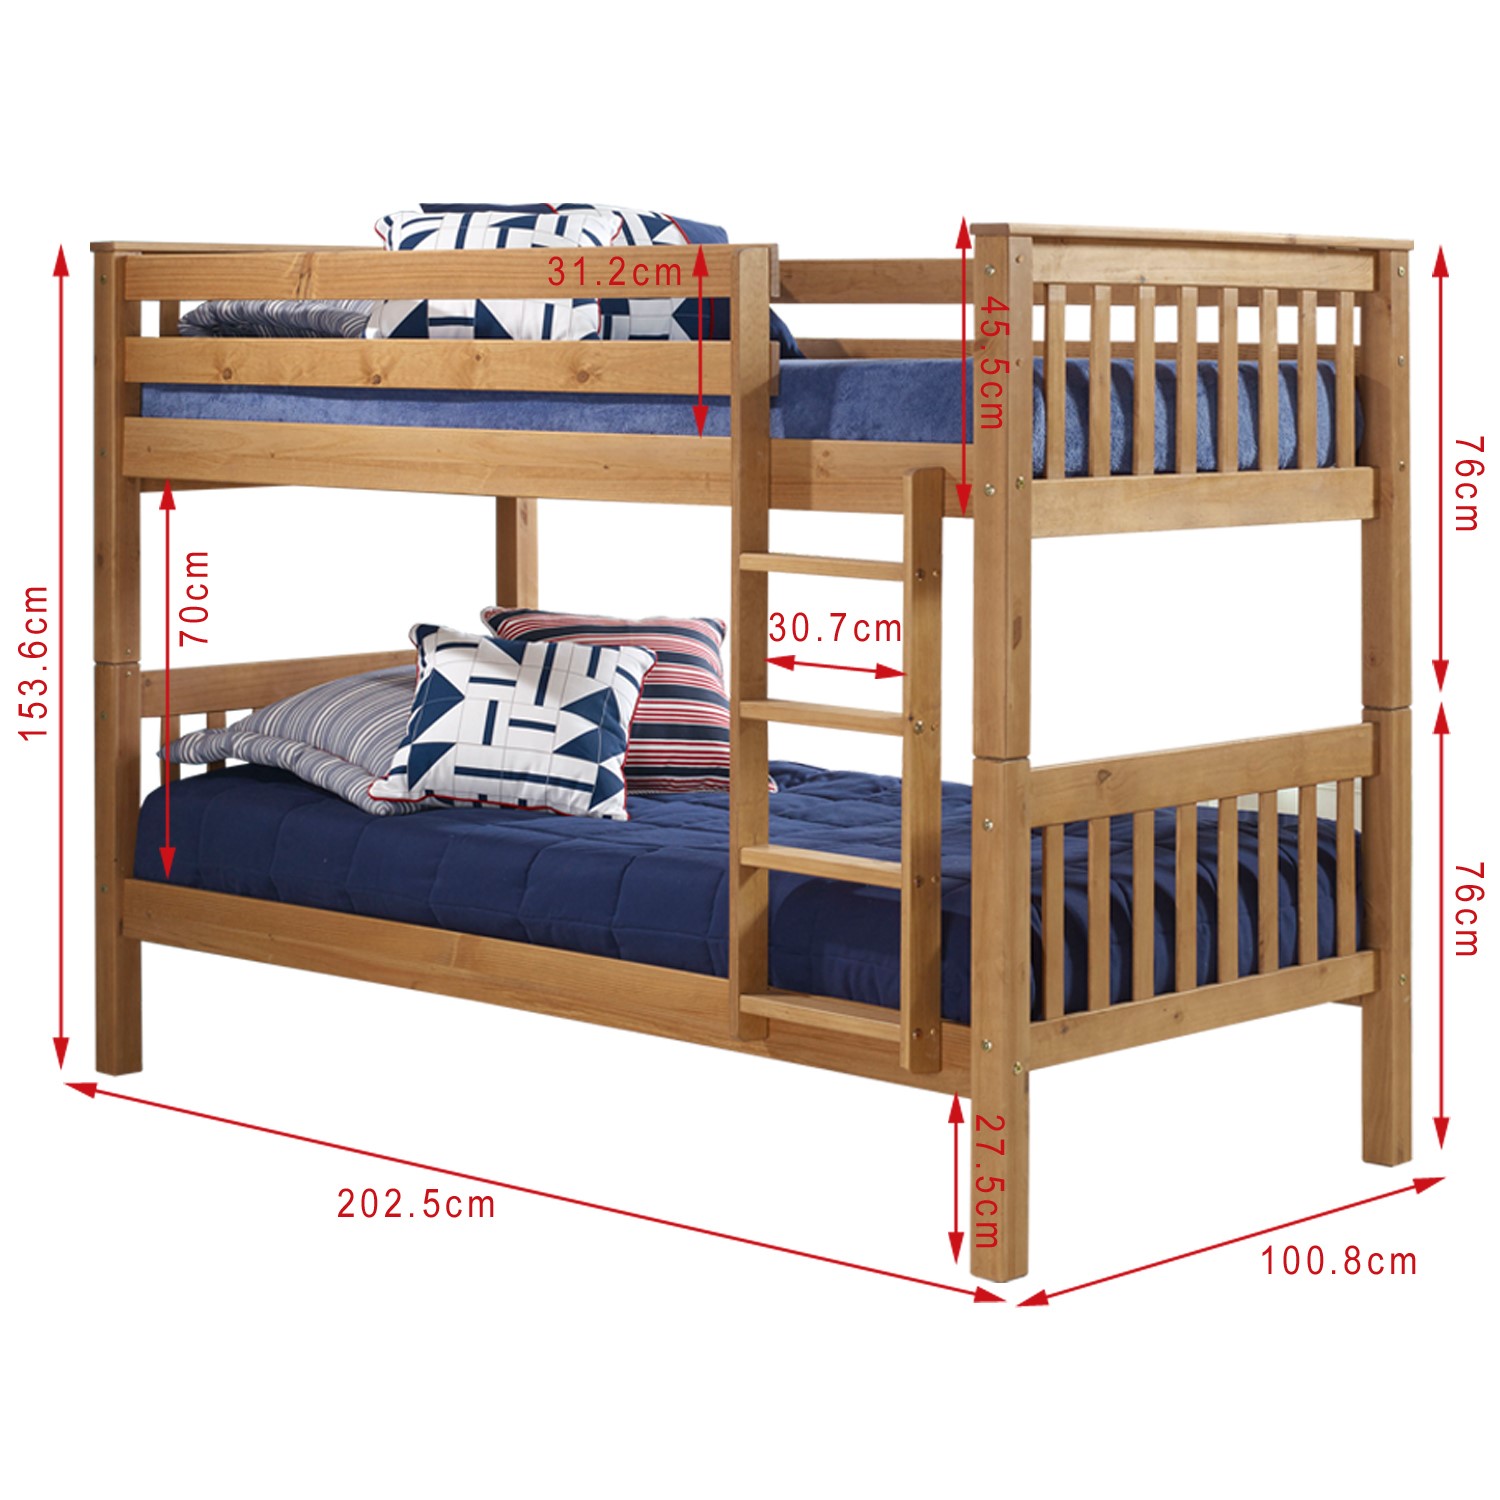 Oxford Pine Single Bunk Bed Ladder, Bunk Beds With Ladder On Left